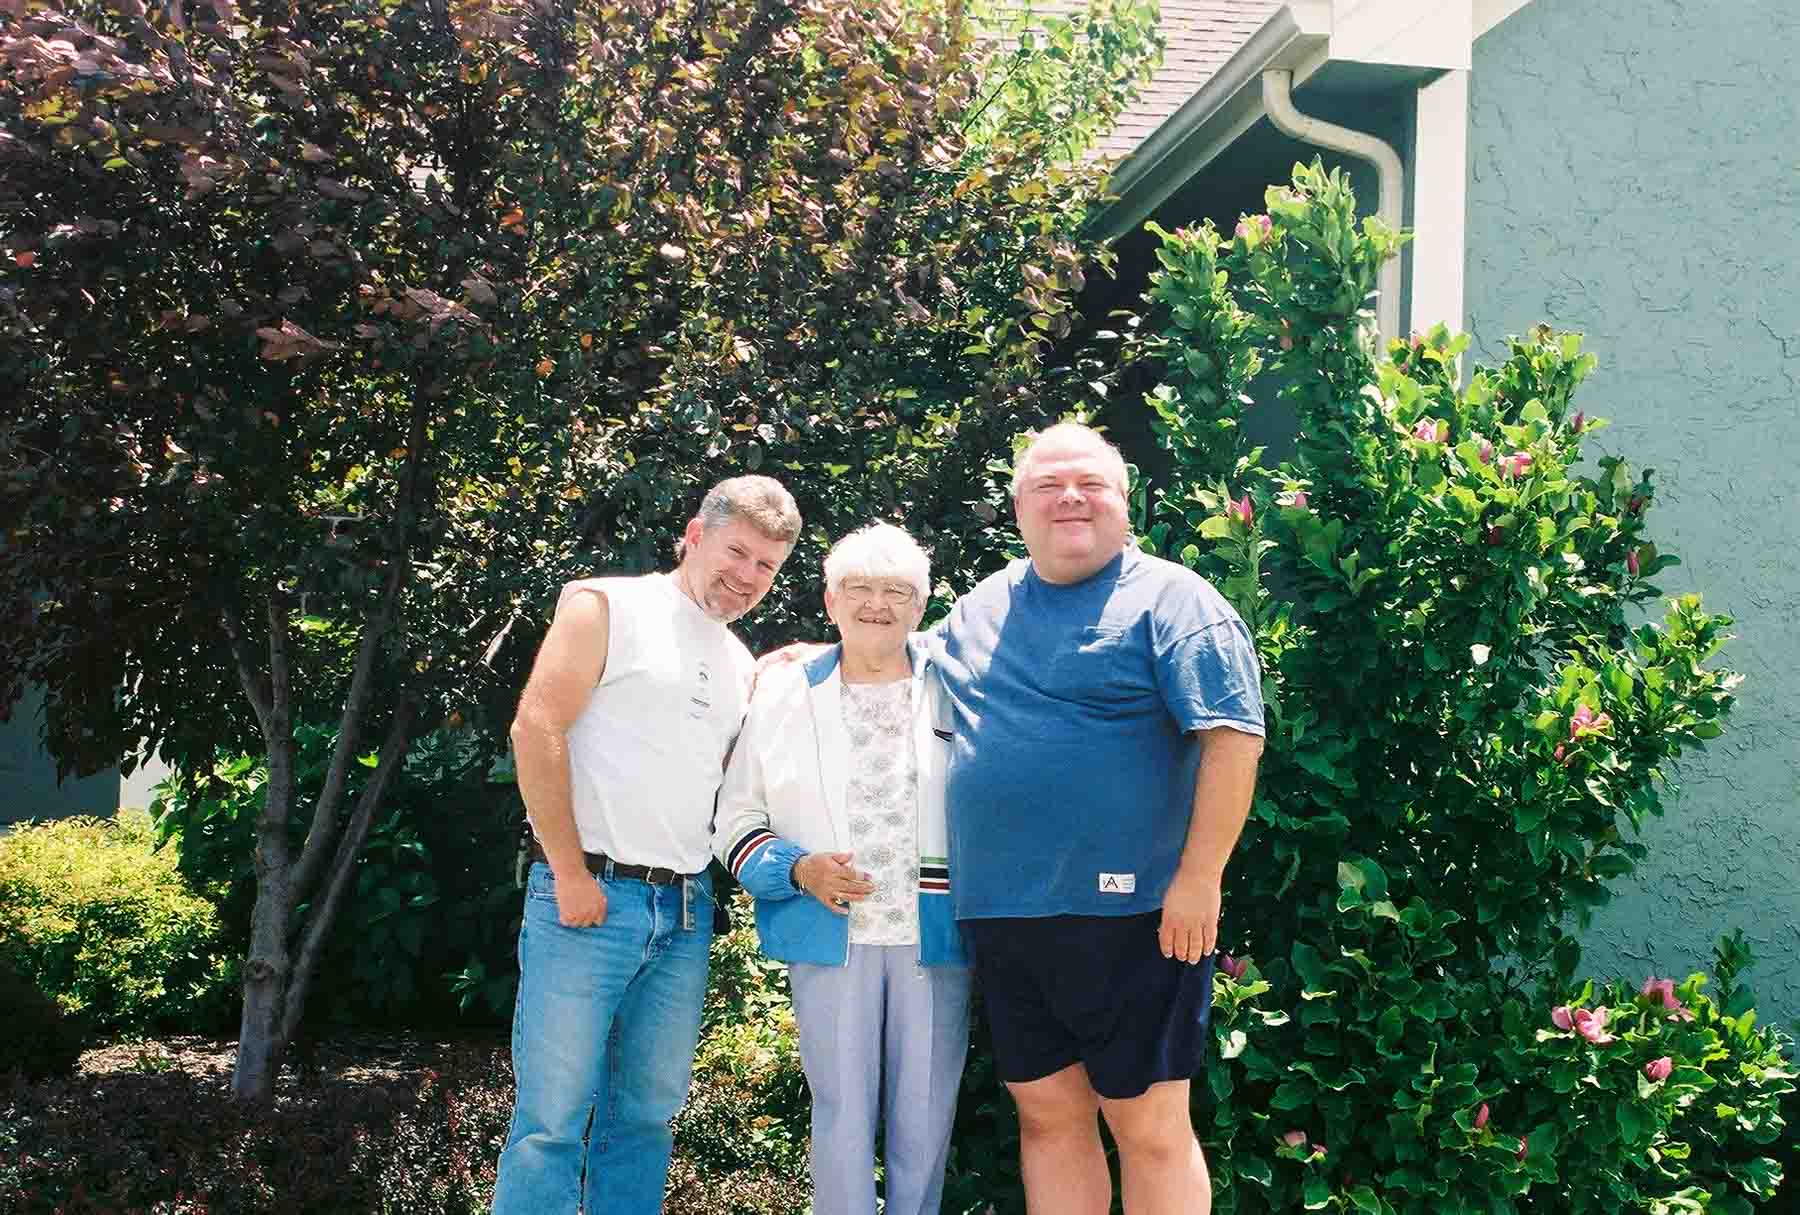 Paul Risner, Don's Aunt Evelyn Crabtree Risner and Don. They came to visit while Julane was at the beach.
Location: Liberty, MO
Date: July 2004